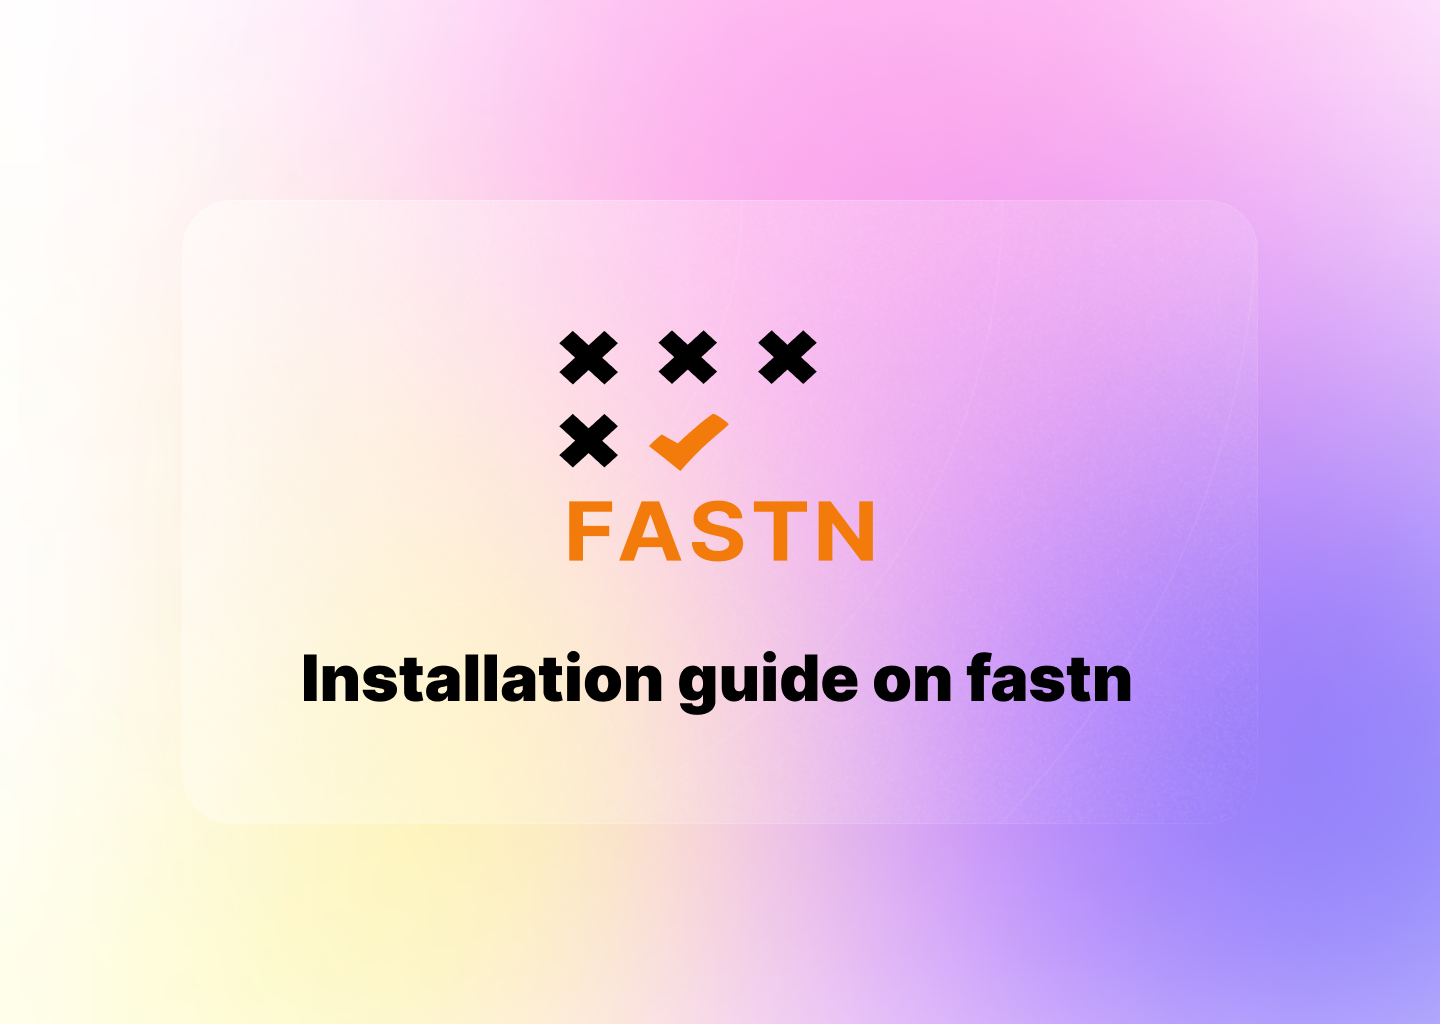 How to install fastn on your local machine